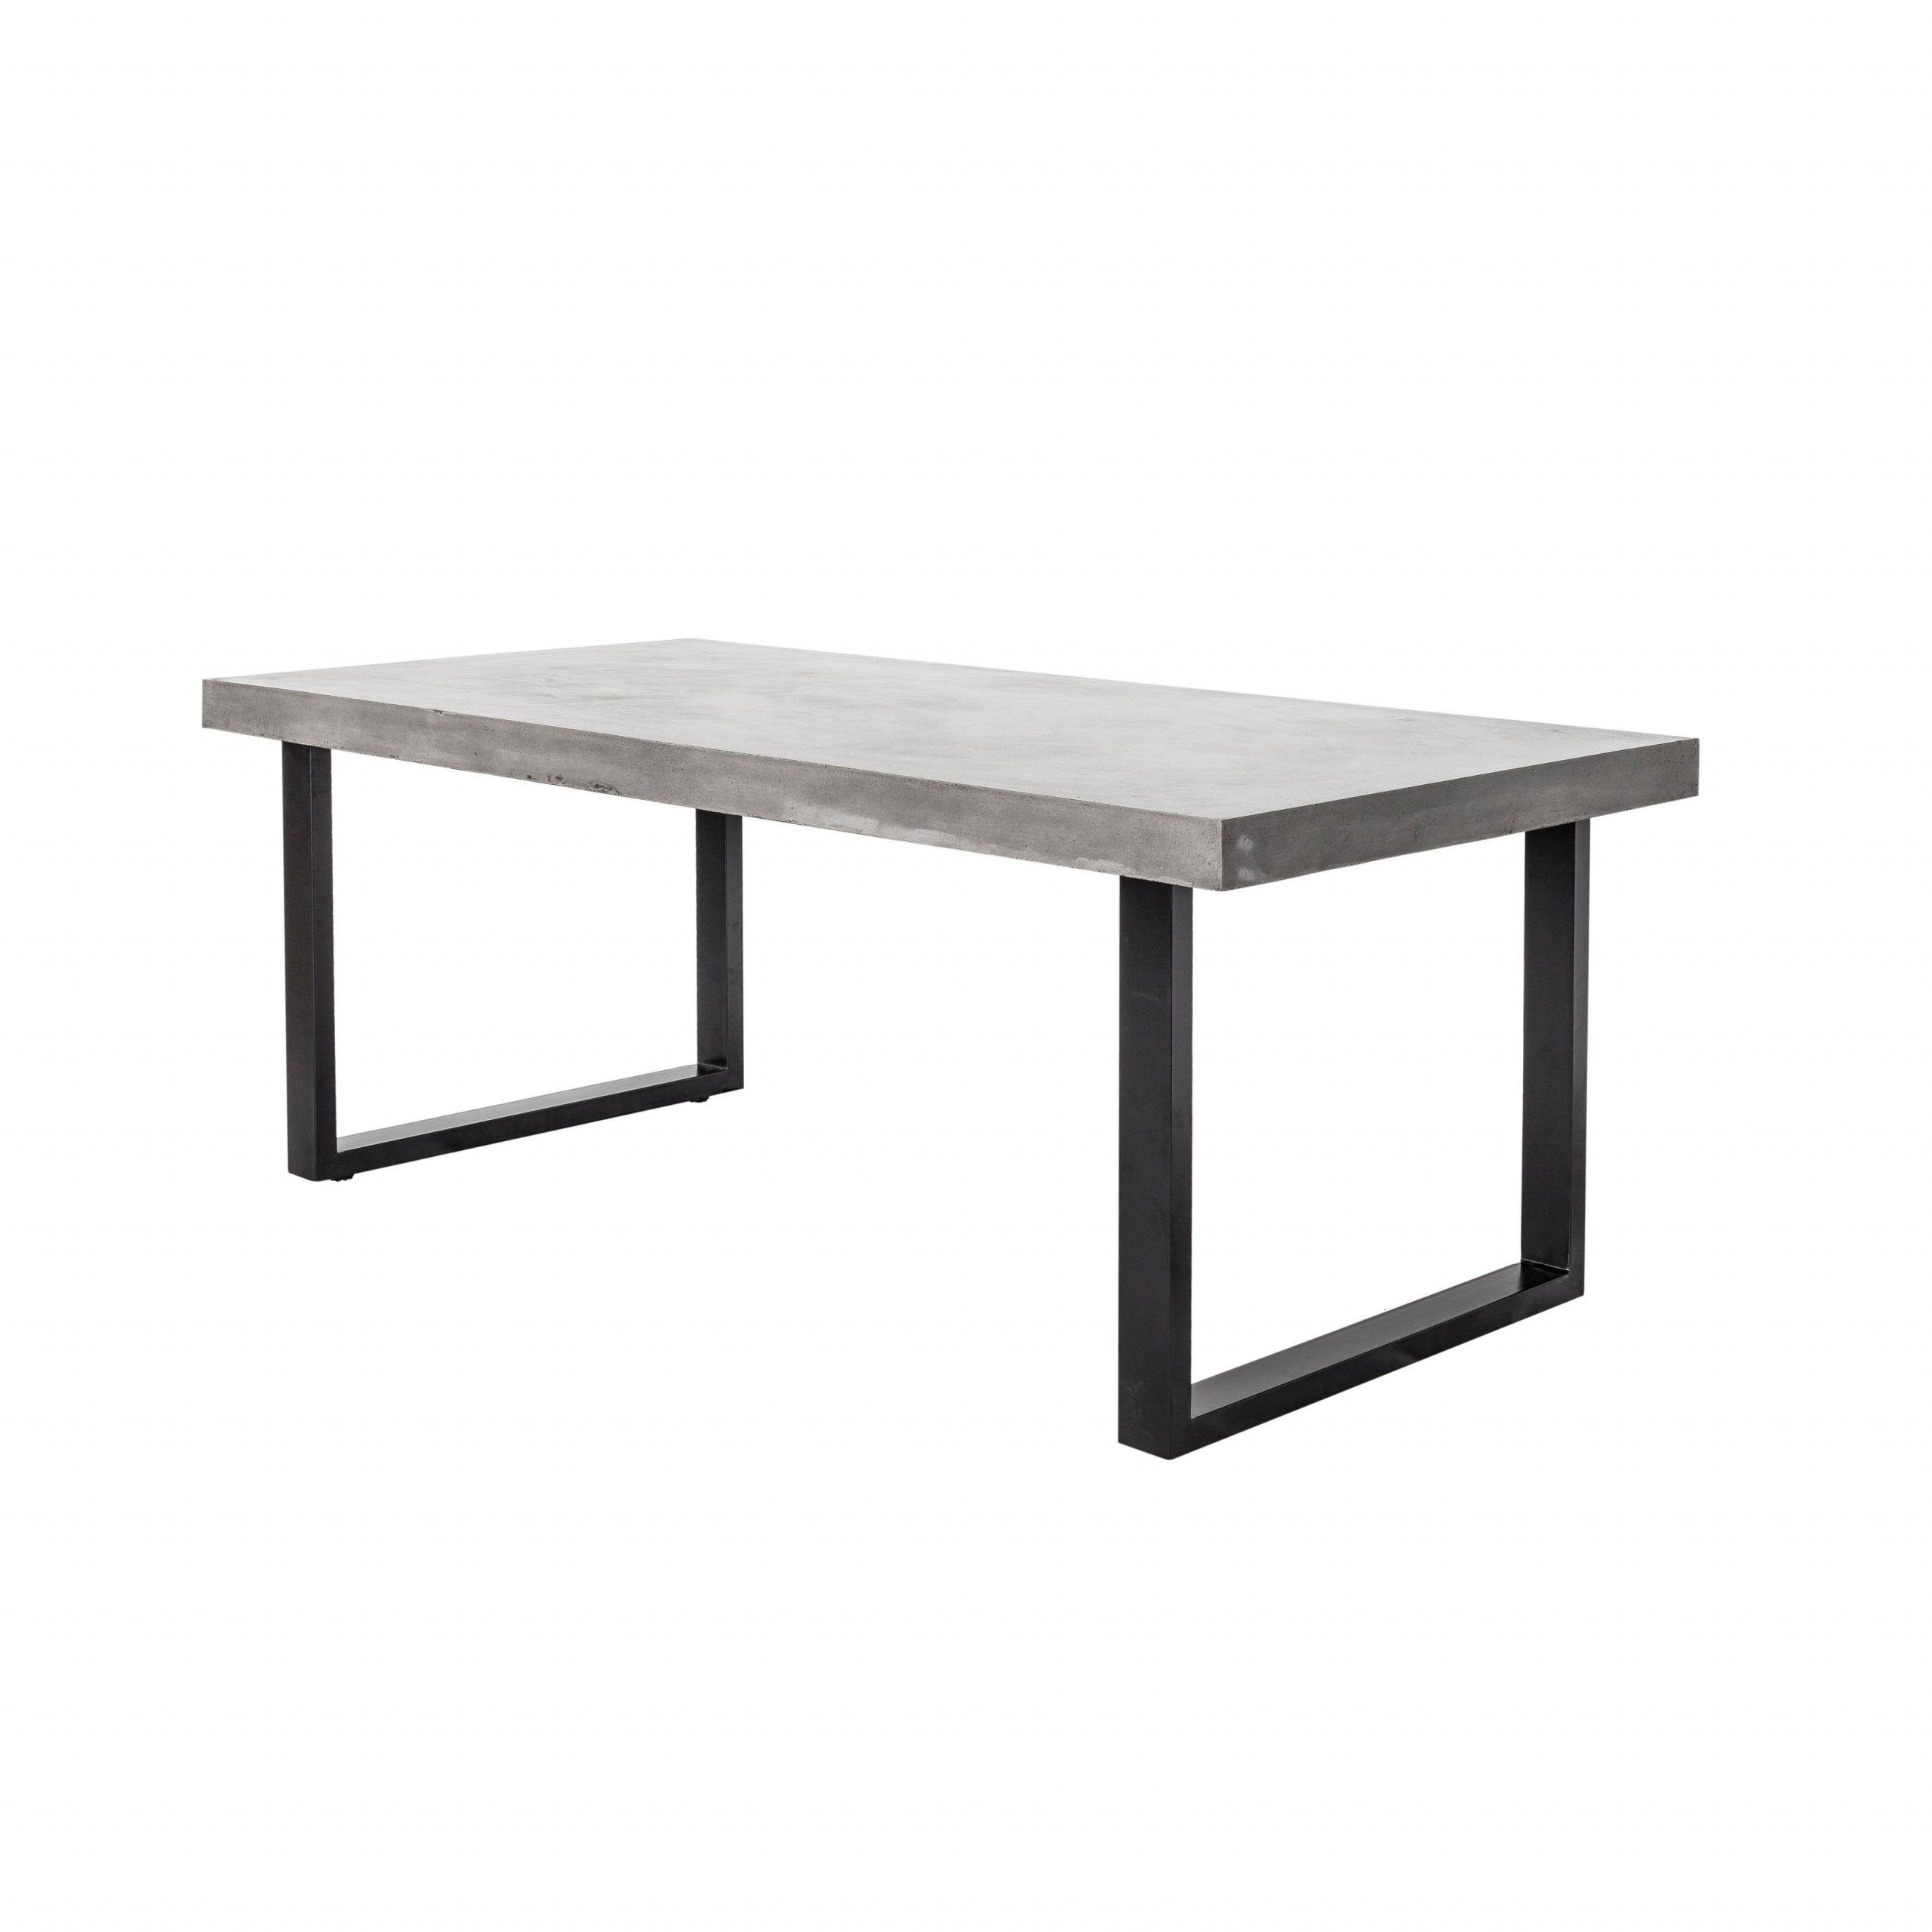 Dark Grey Small Outdoor Dining Table Modern Farmhouse Room Inside 2019 Modern Farmhouse Extending Dining Tables (View 12 of 25)